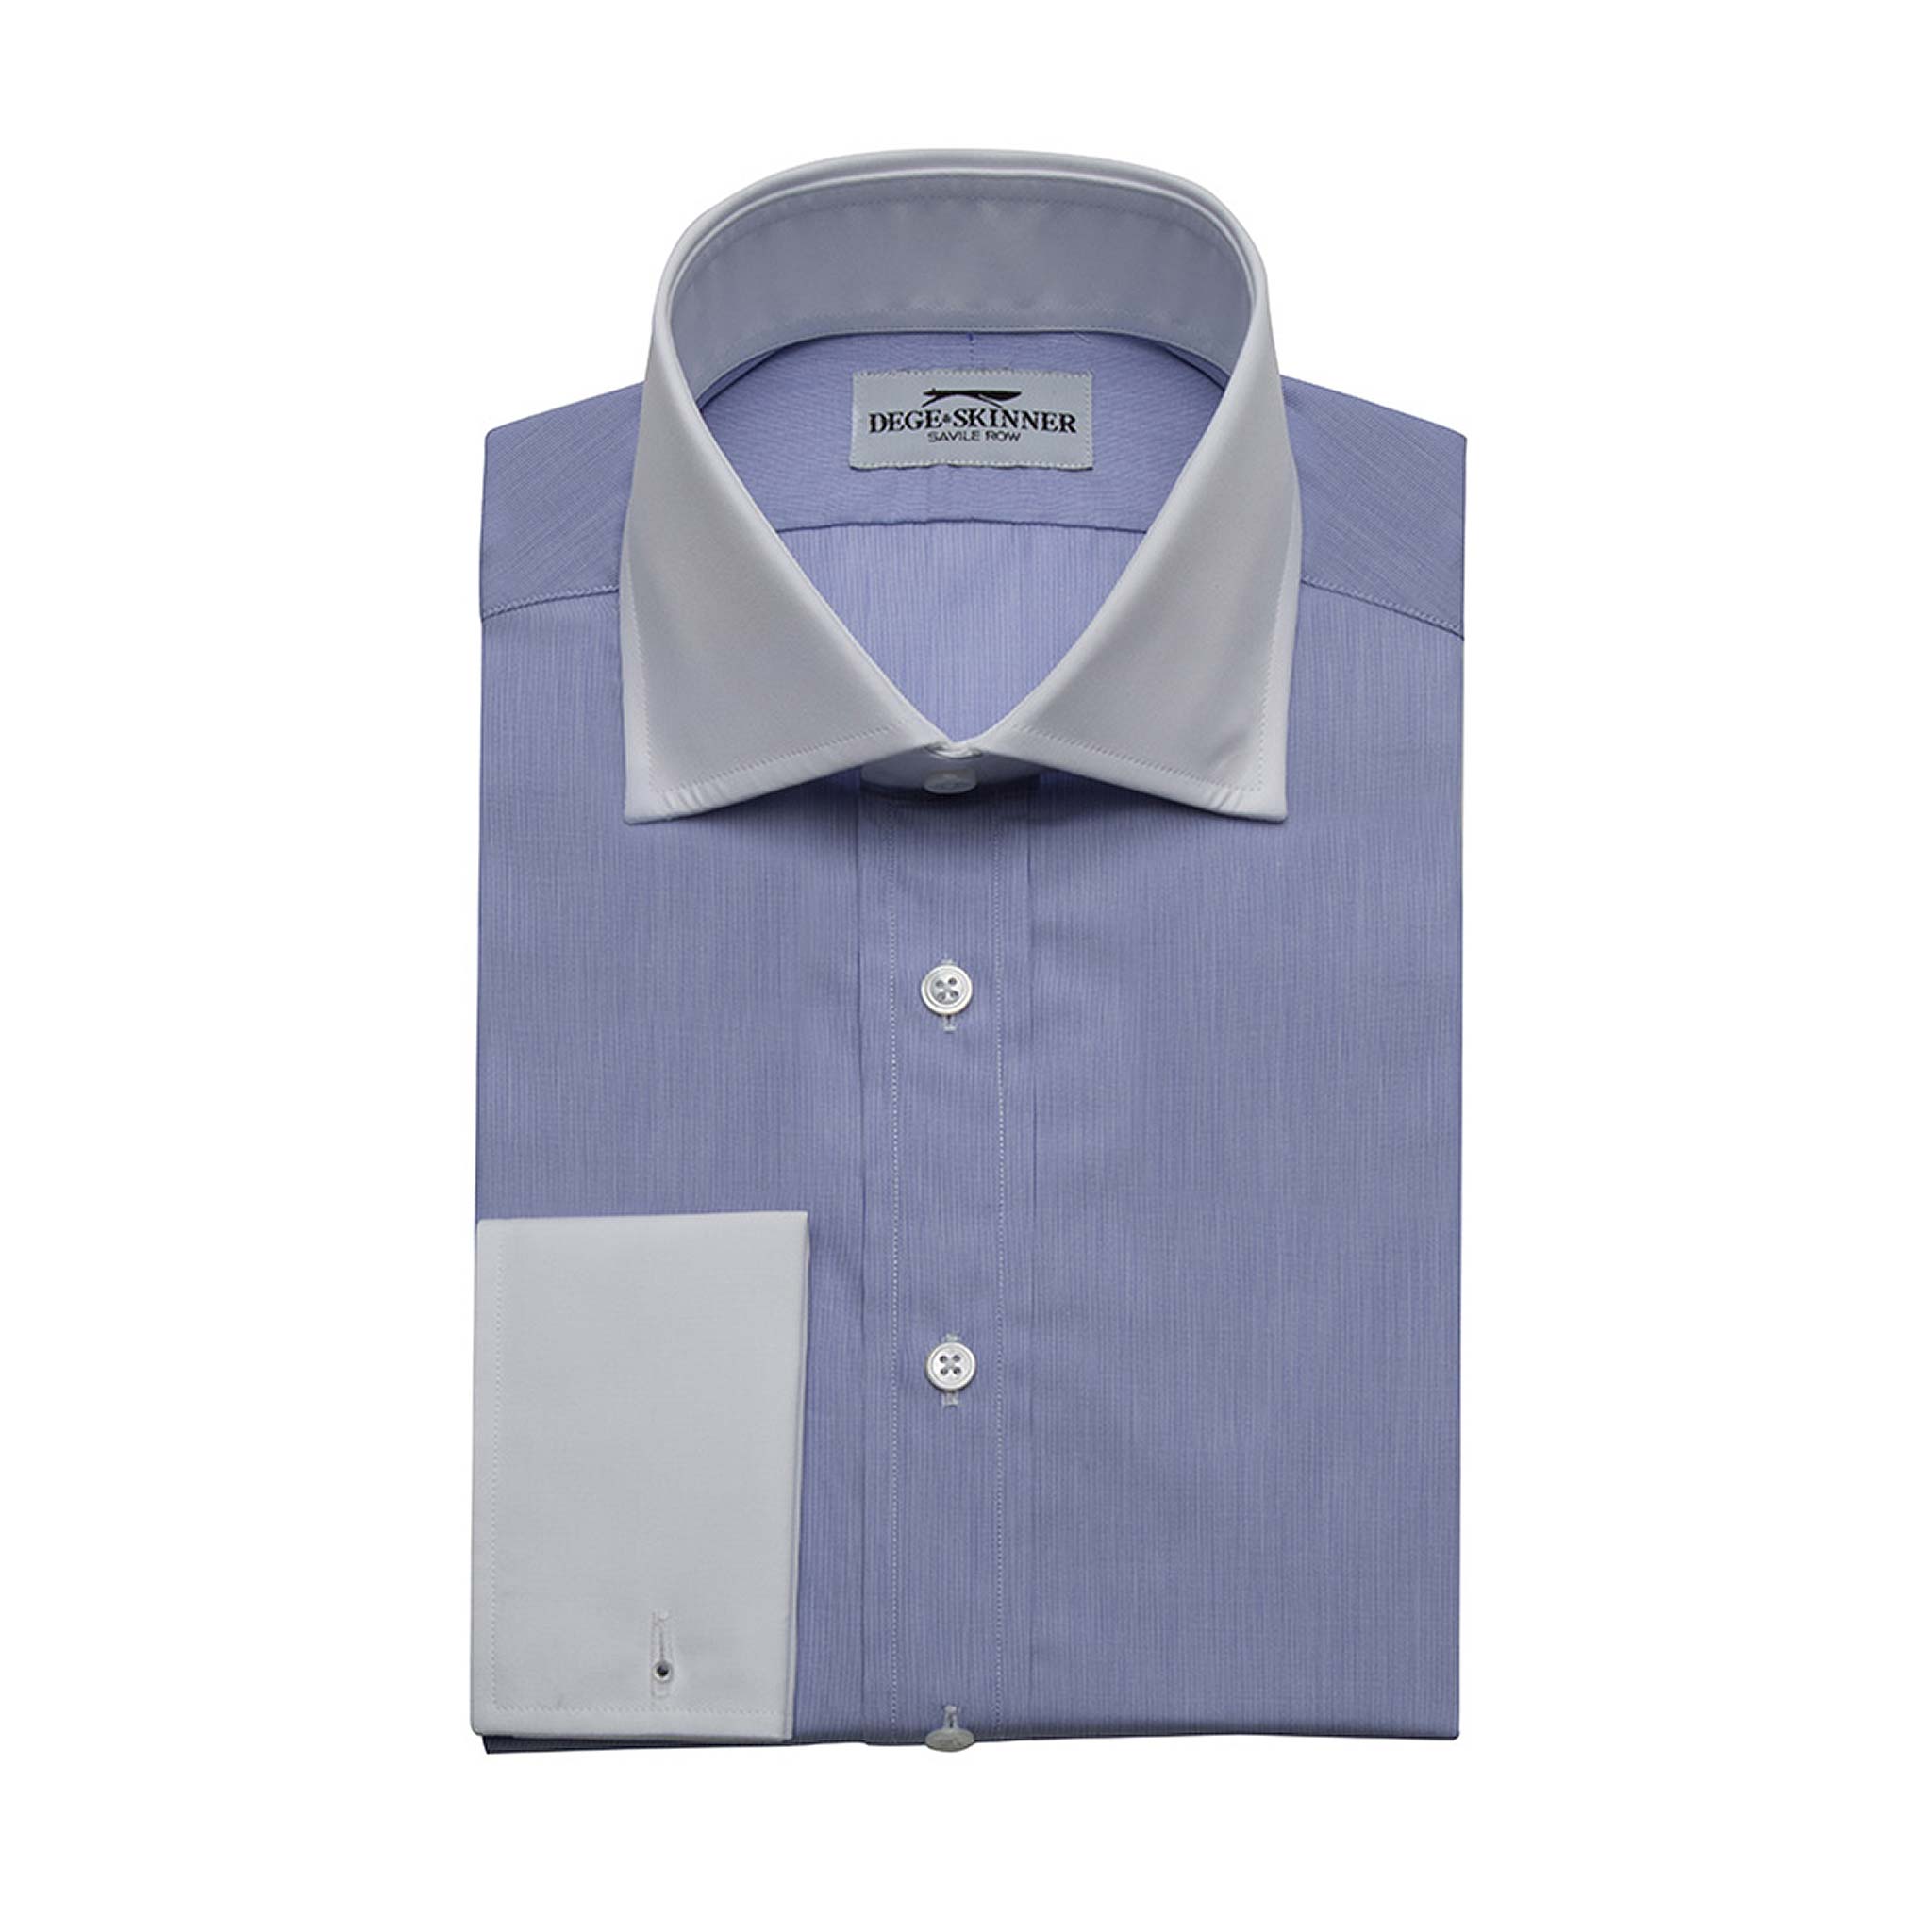 mens blue shirt with white collar and cuffs